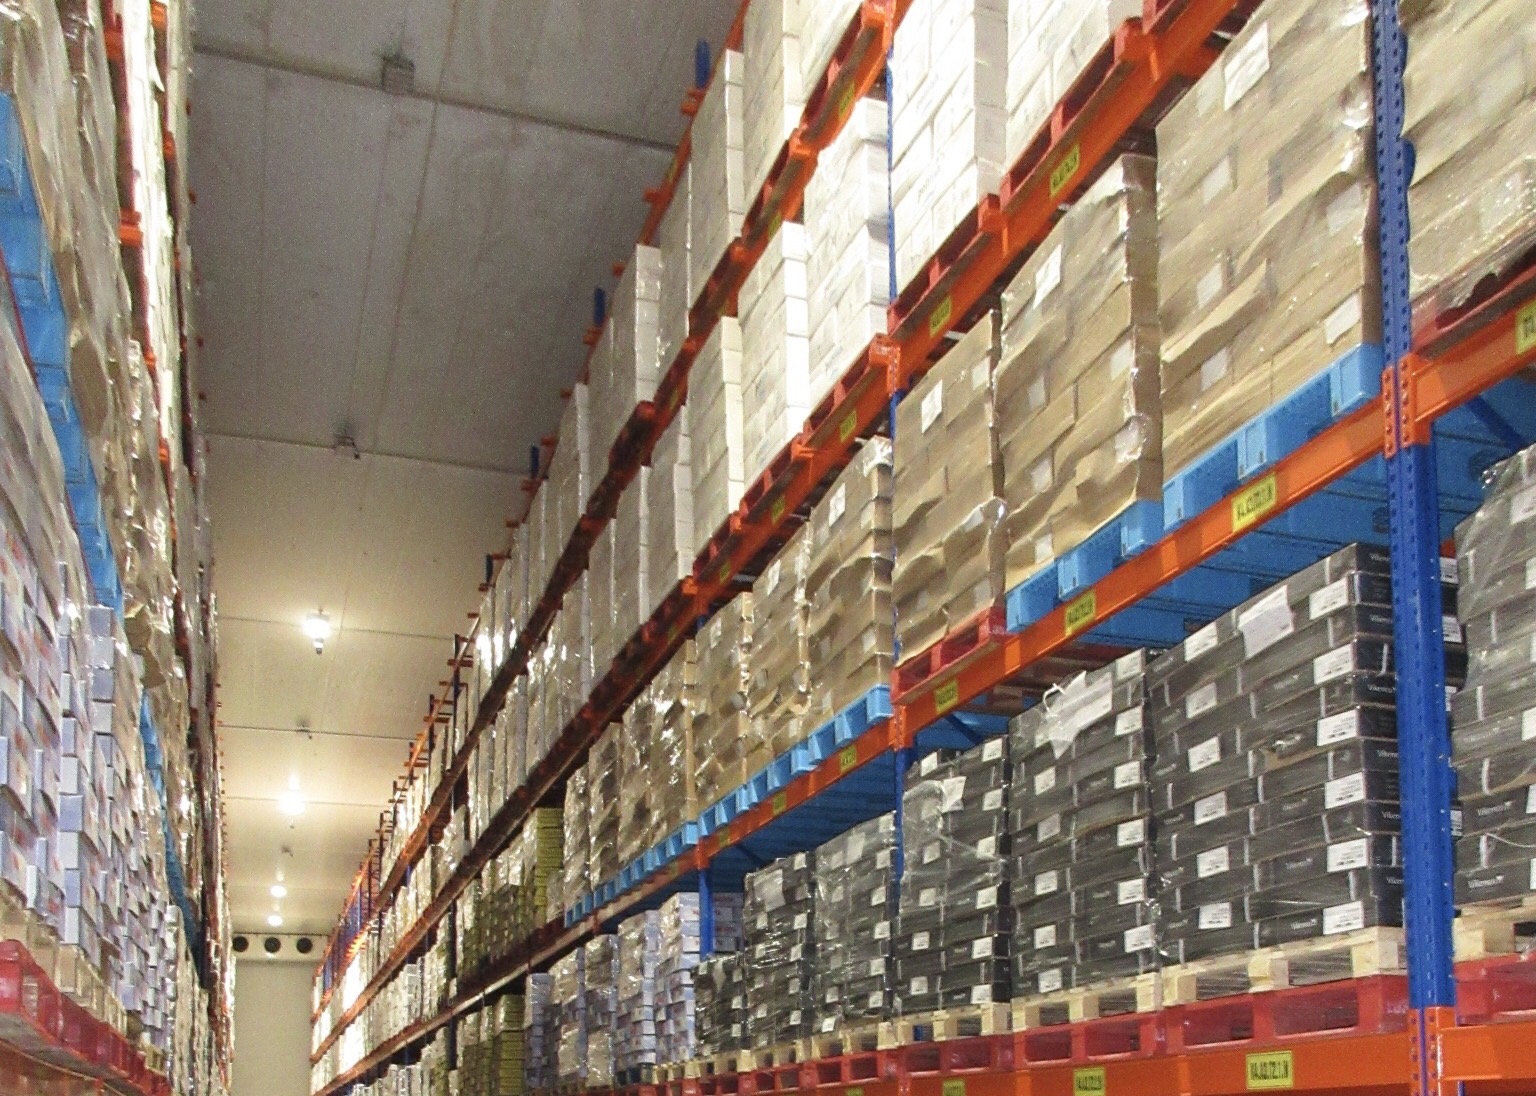 WHAT IS COLD STORAGE? CLASSIFICATION OF COLD STORAGES